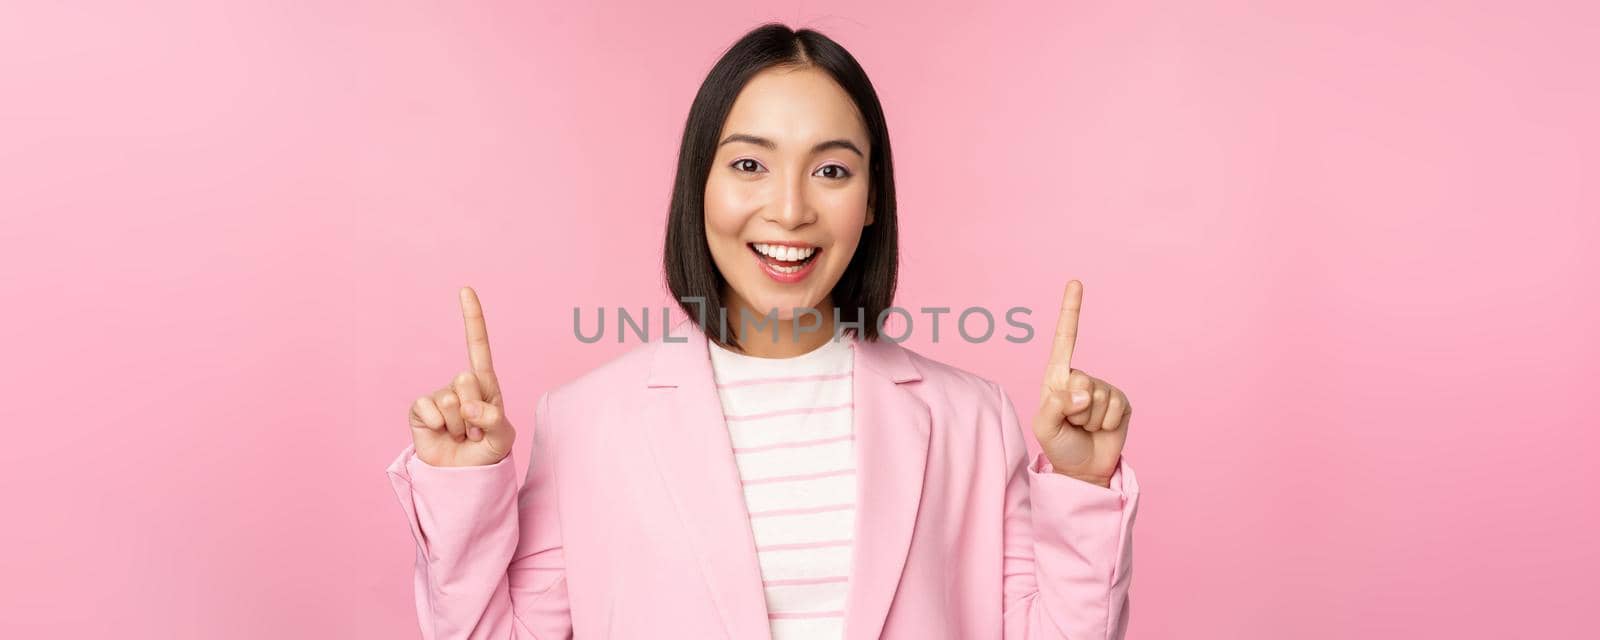 Smiling korean businesswoman, pointing fingers up, showing advertisement, banner or logo on top, standing in suit over pink background.